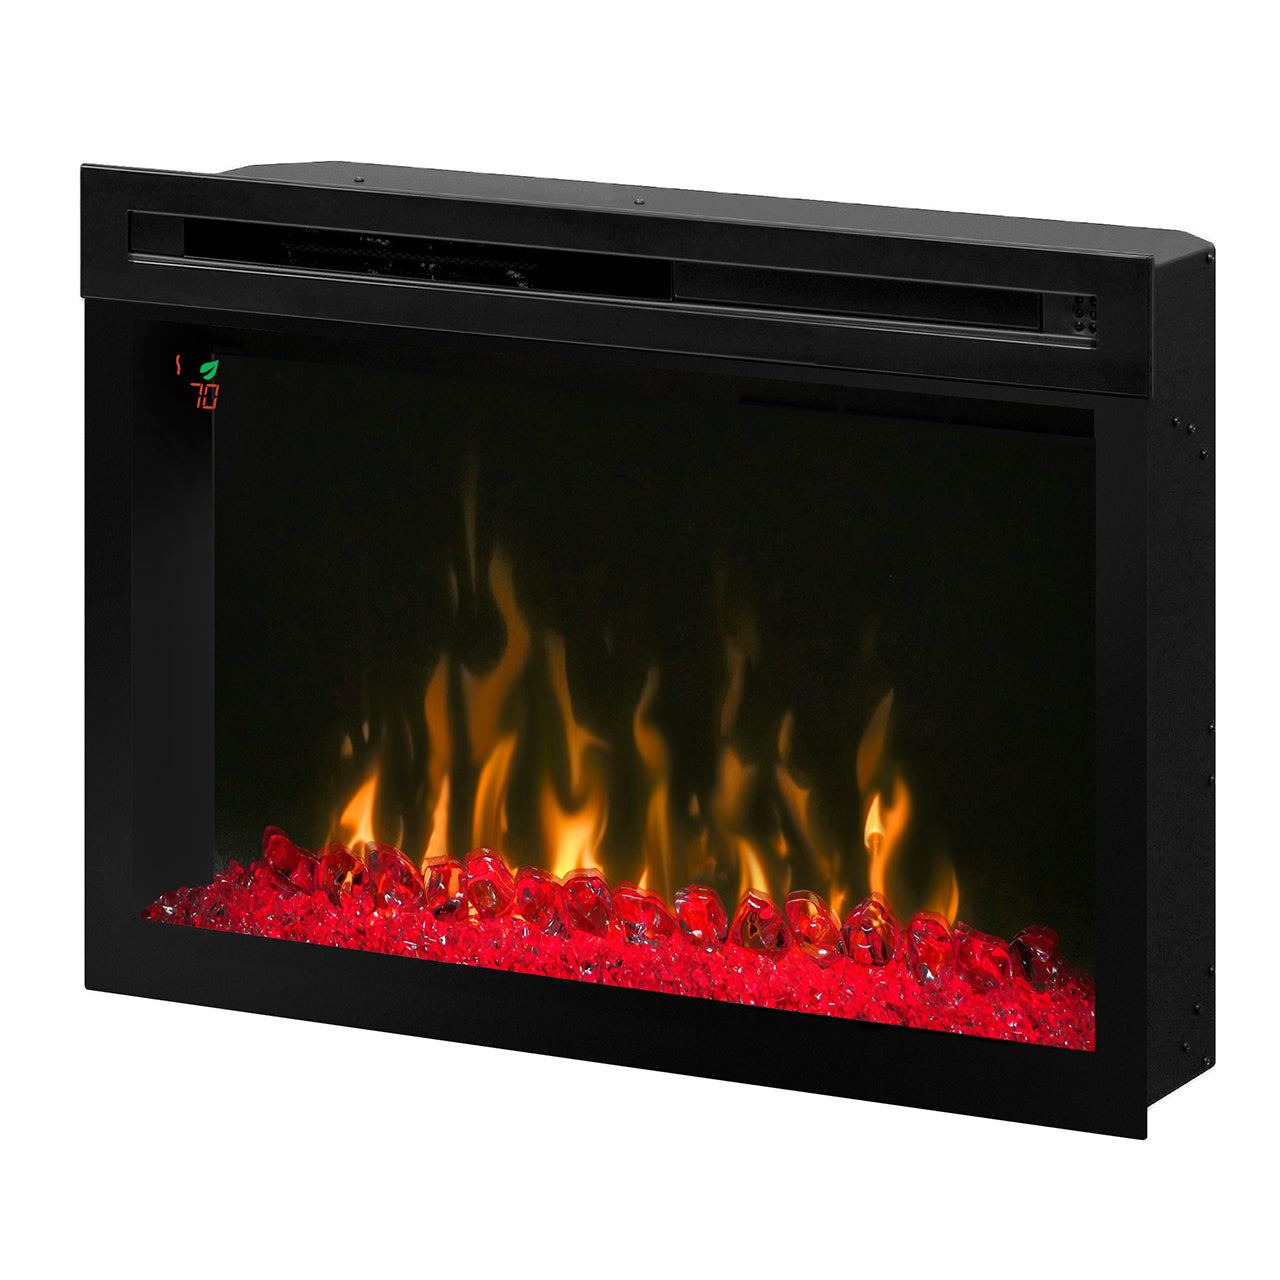 Dimplex 33" Multi-Fire XD Electric Firebox with Acrylic Ice Embers -  PF3033HG - Fireplace Choice